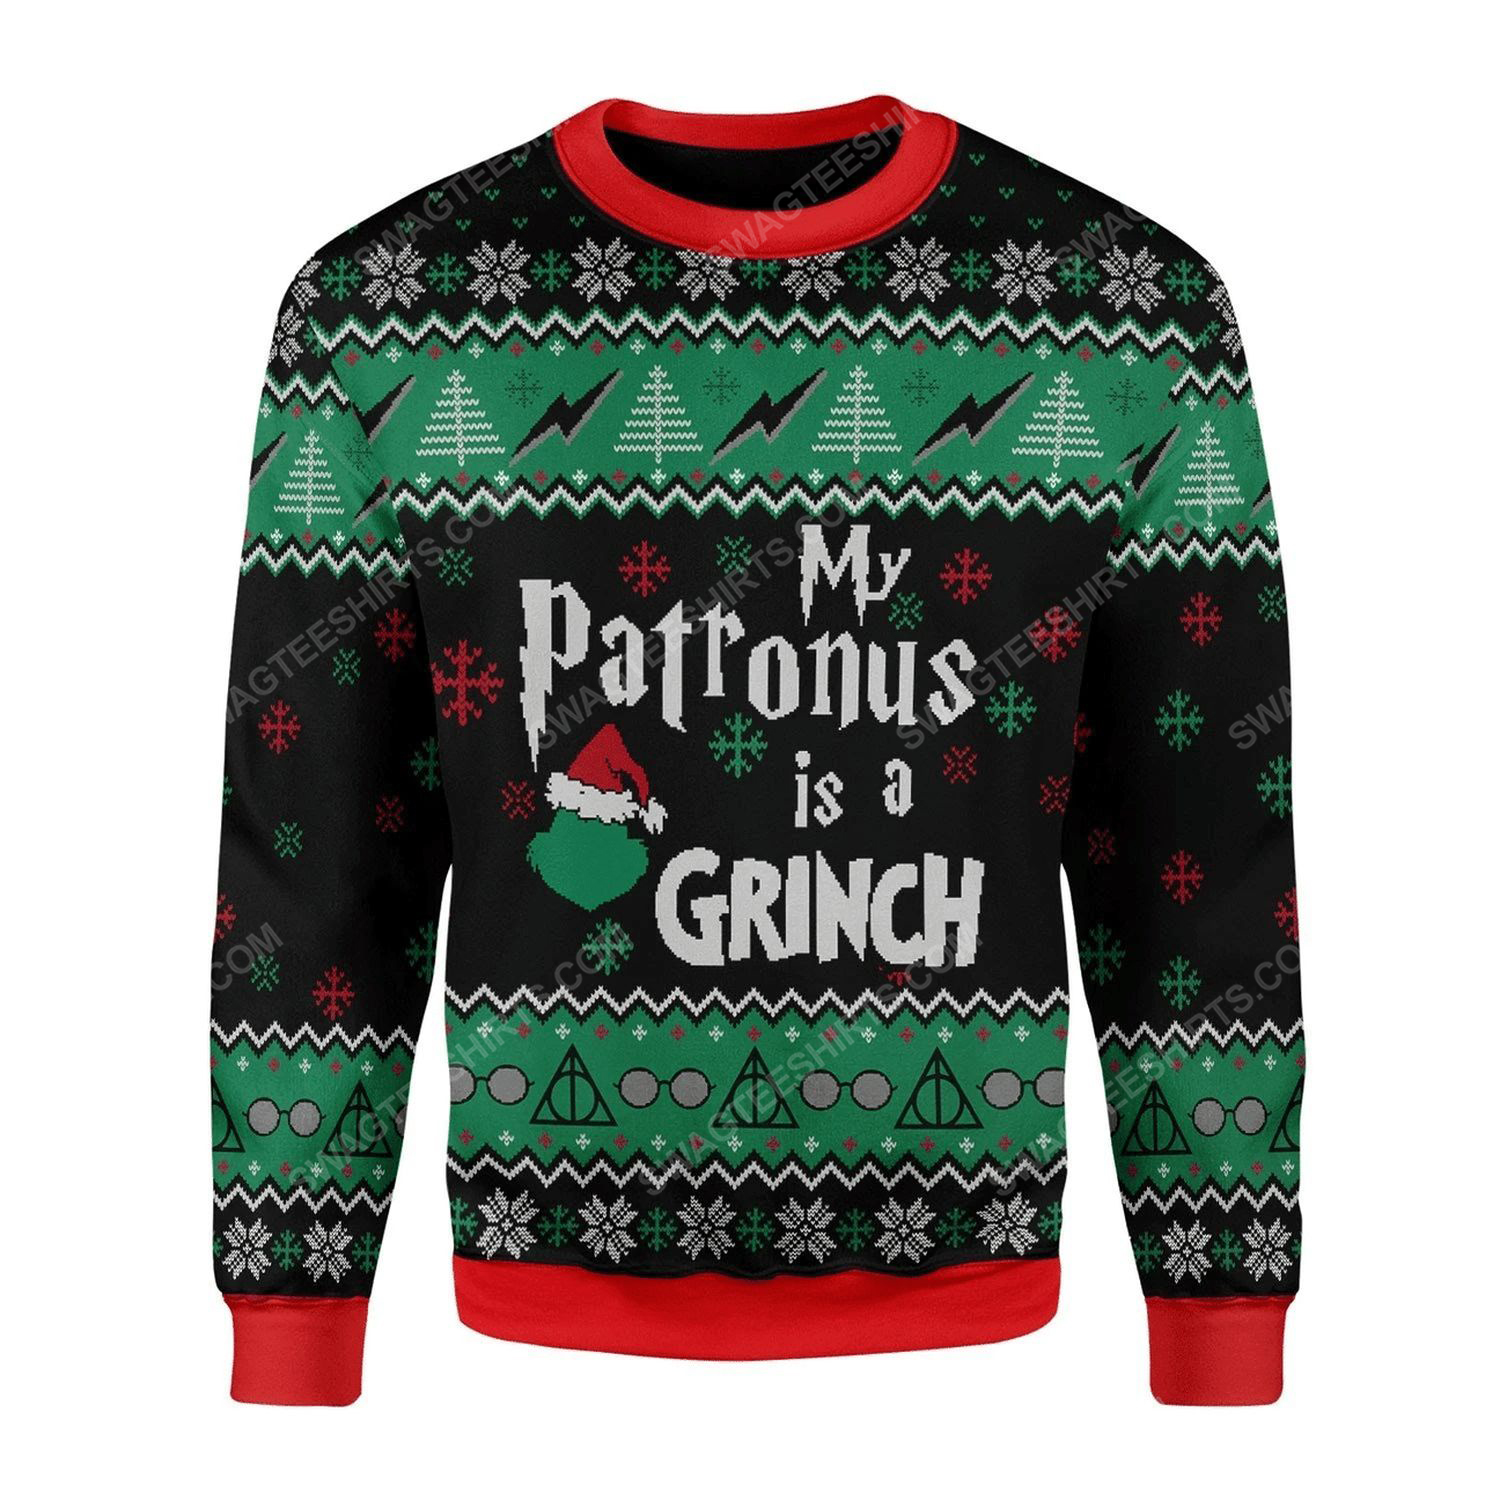 My patronus is the grinch ugly christmas sweater